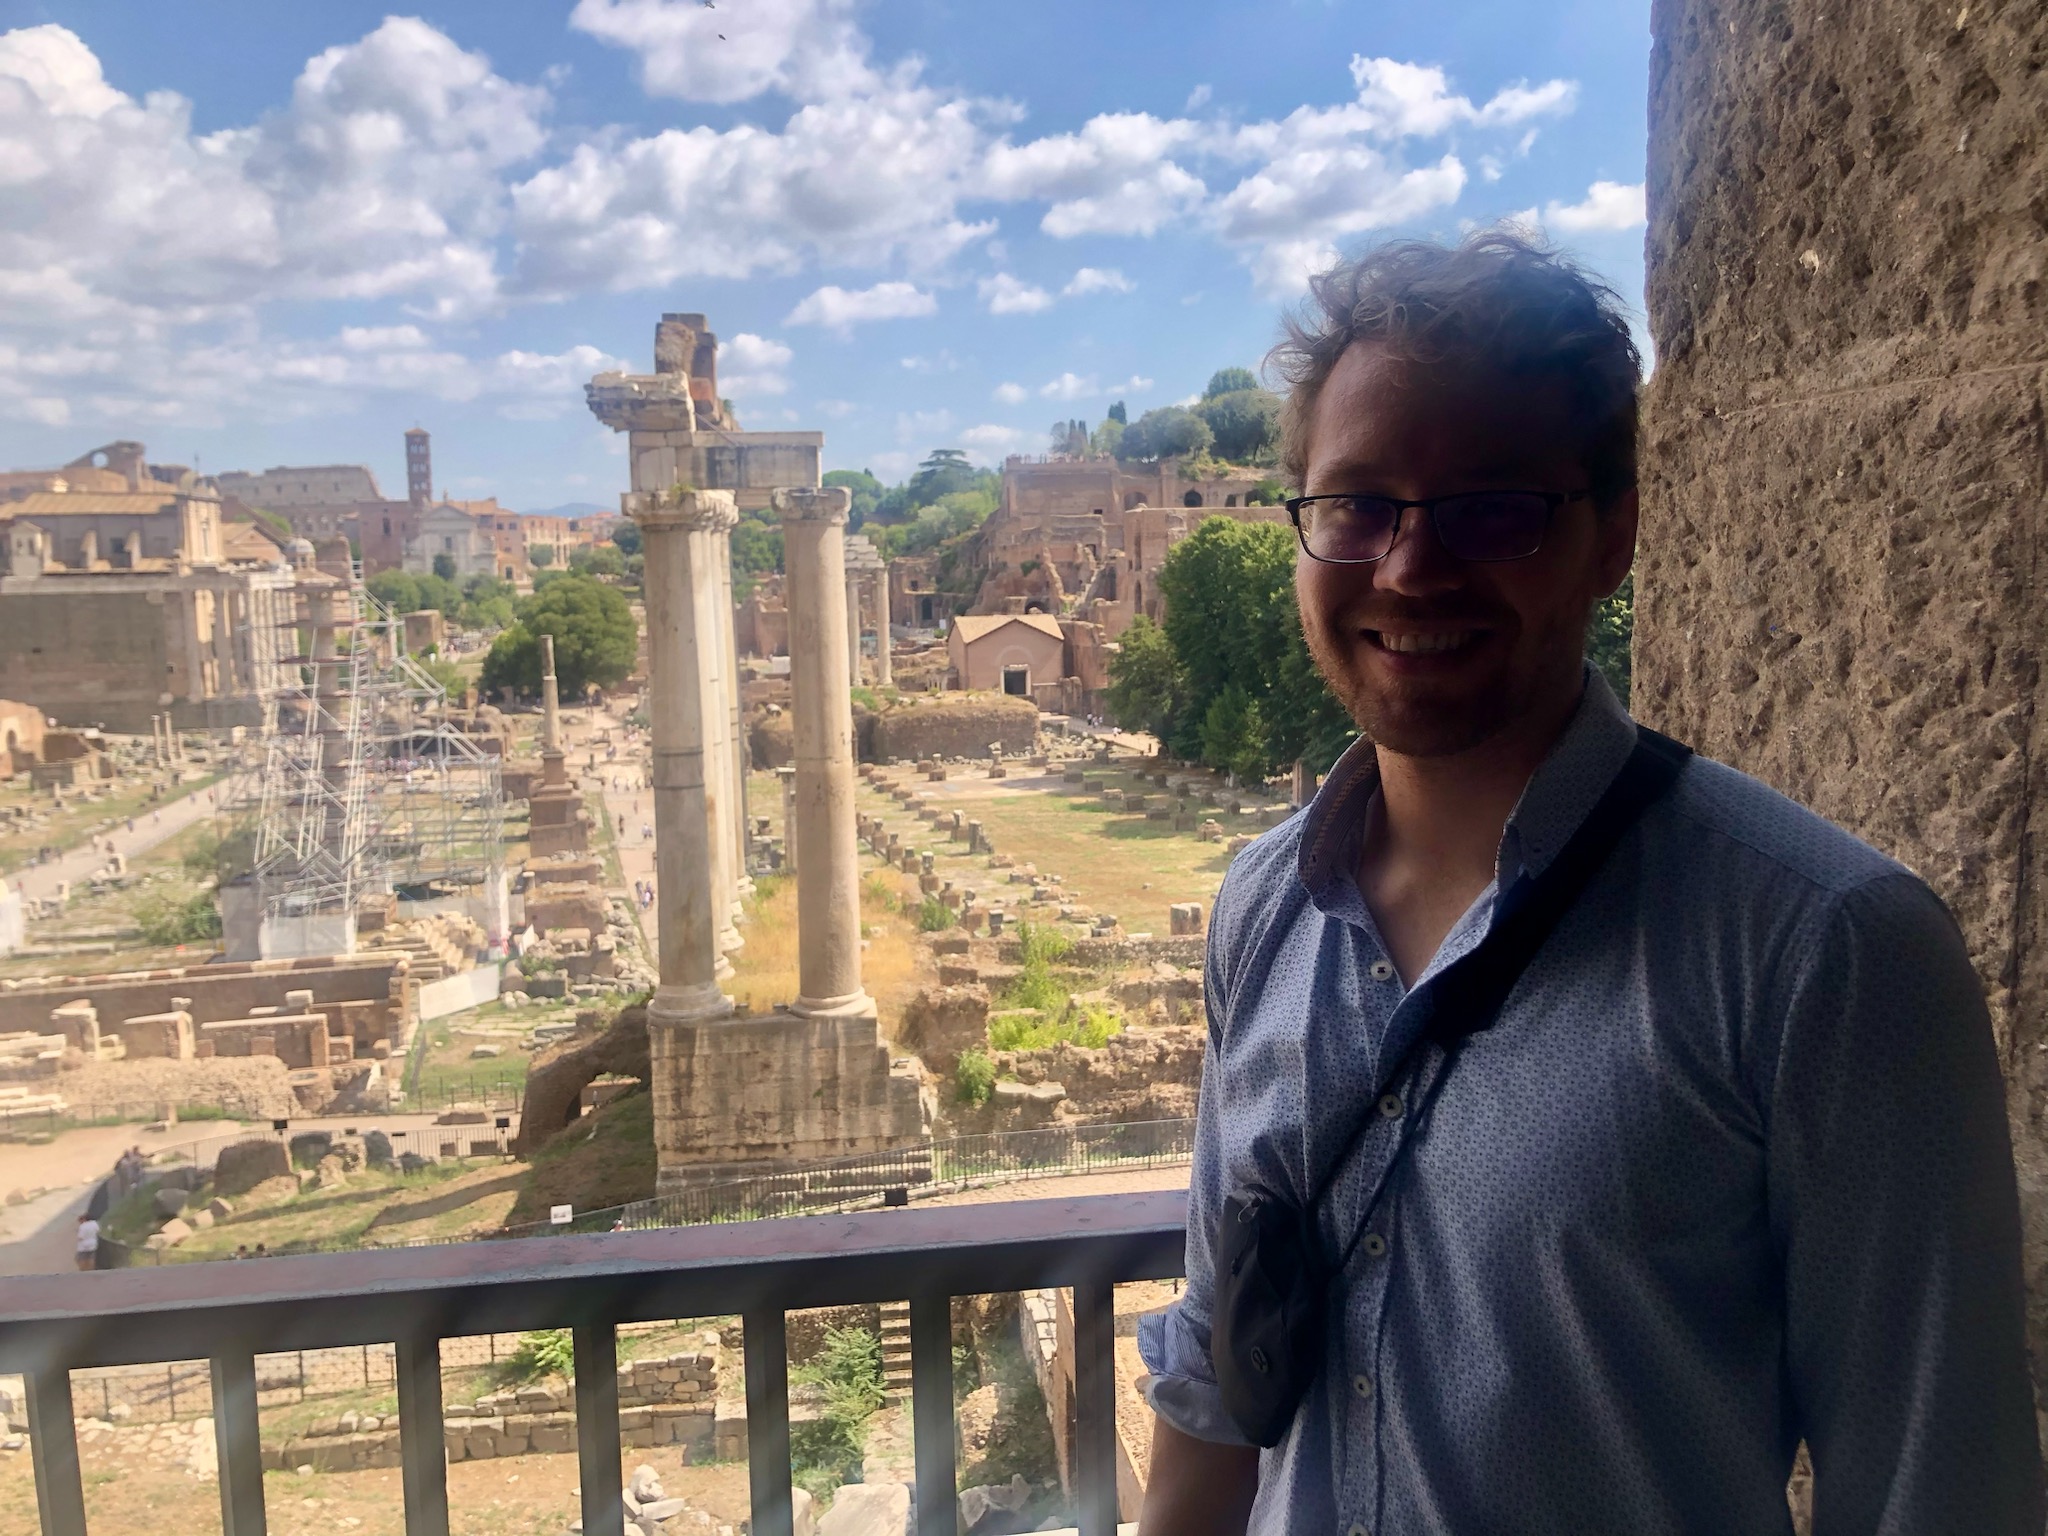 man with glasses standing in front of ancient Greek or Roman ruins